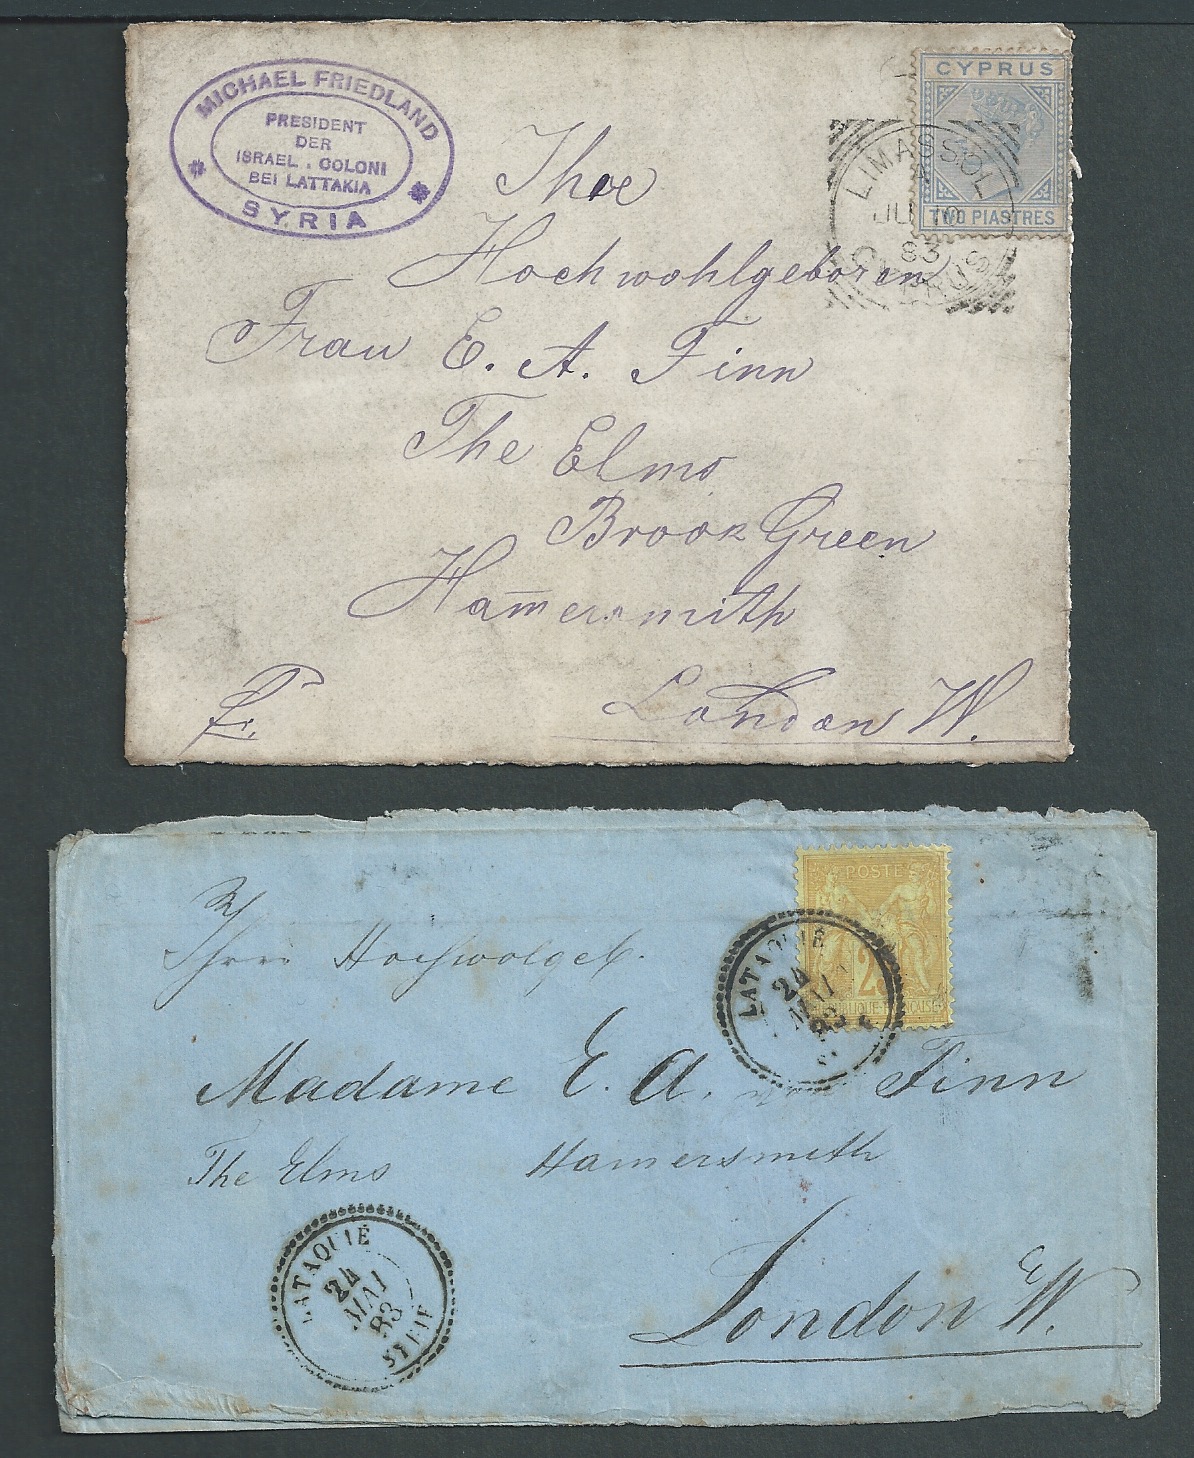 Syria 1883 Two covers franked France 25c cancelled by "LATAQUIE / SYRIE" French P.O. c..d.s. and a f